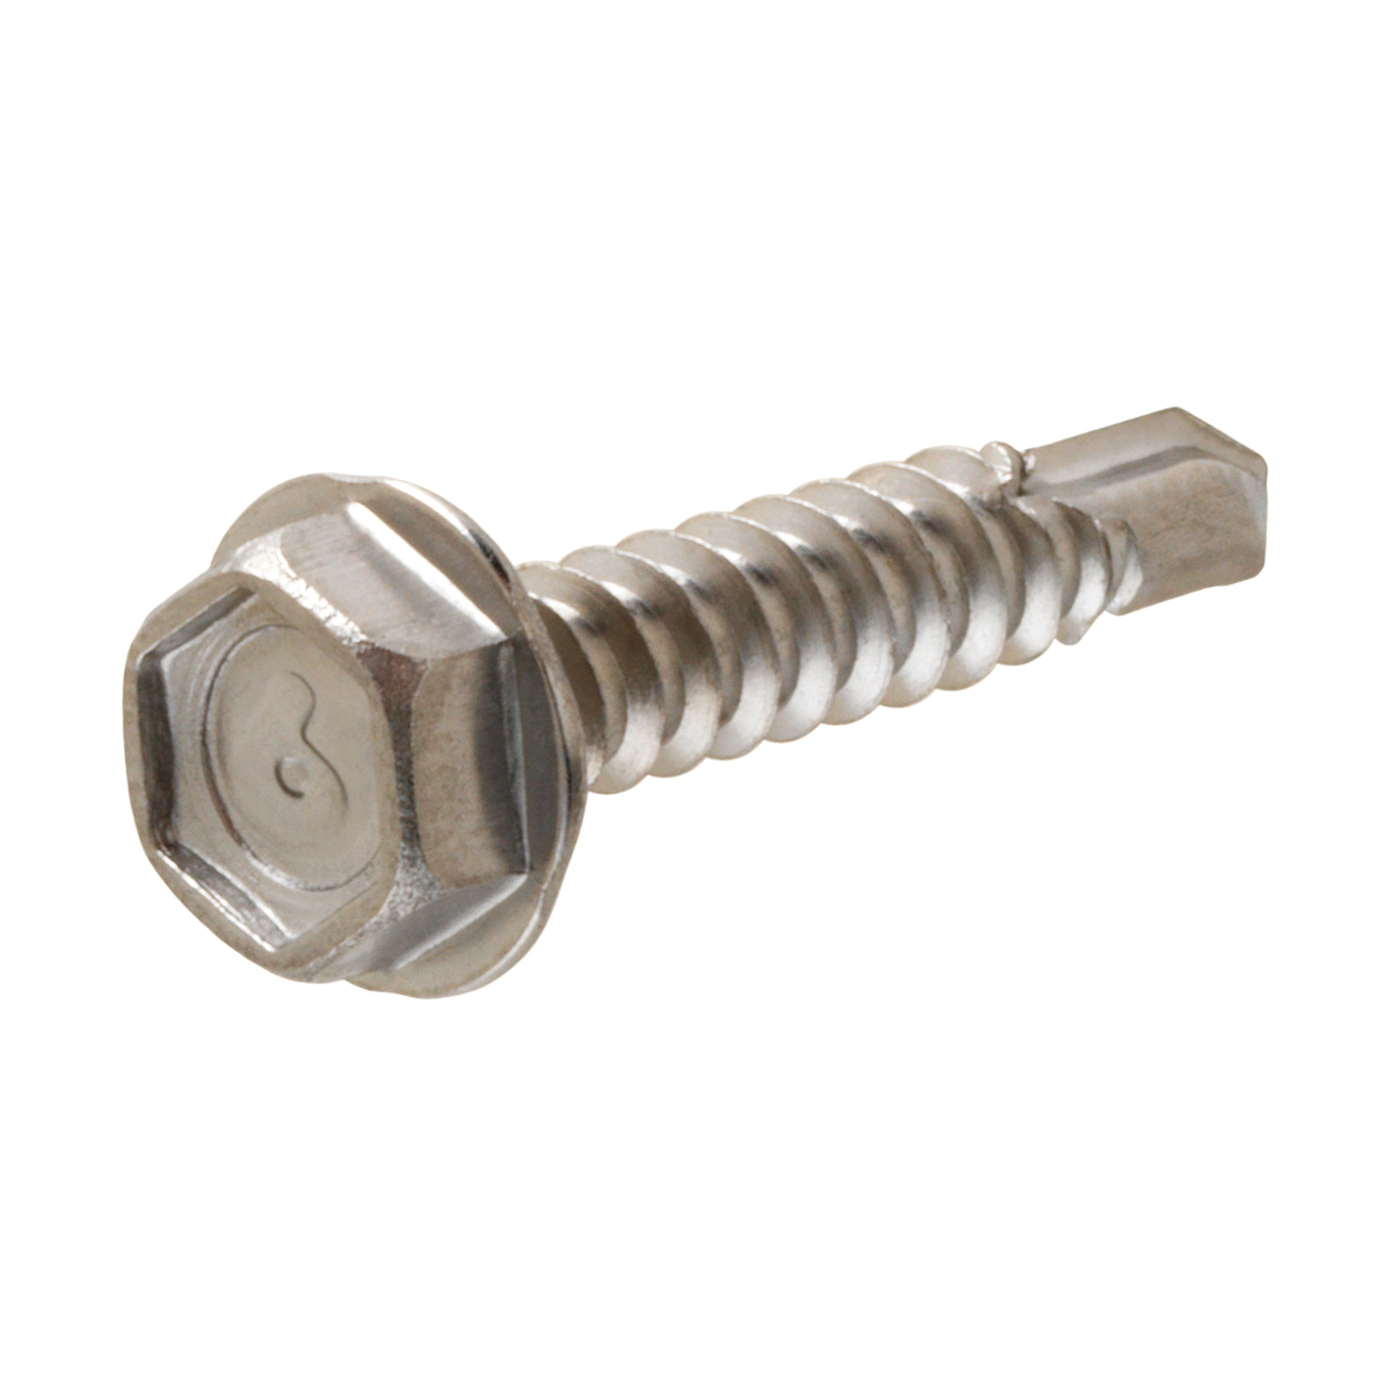 881843 Screw, #12 Thread, 1-1/2 in L, Washer Head, Hex Drive, Self-Drilling Point, Stainless Steel